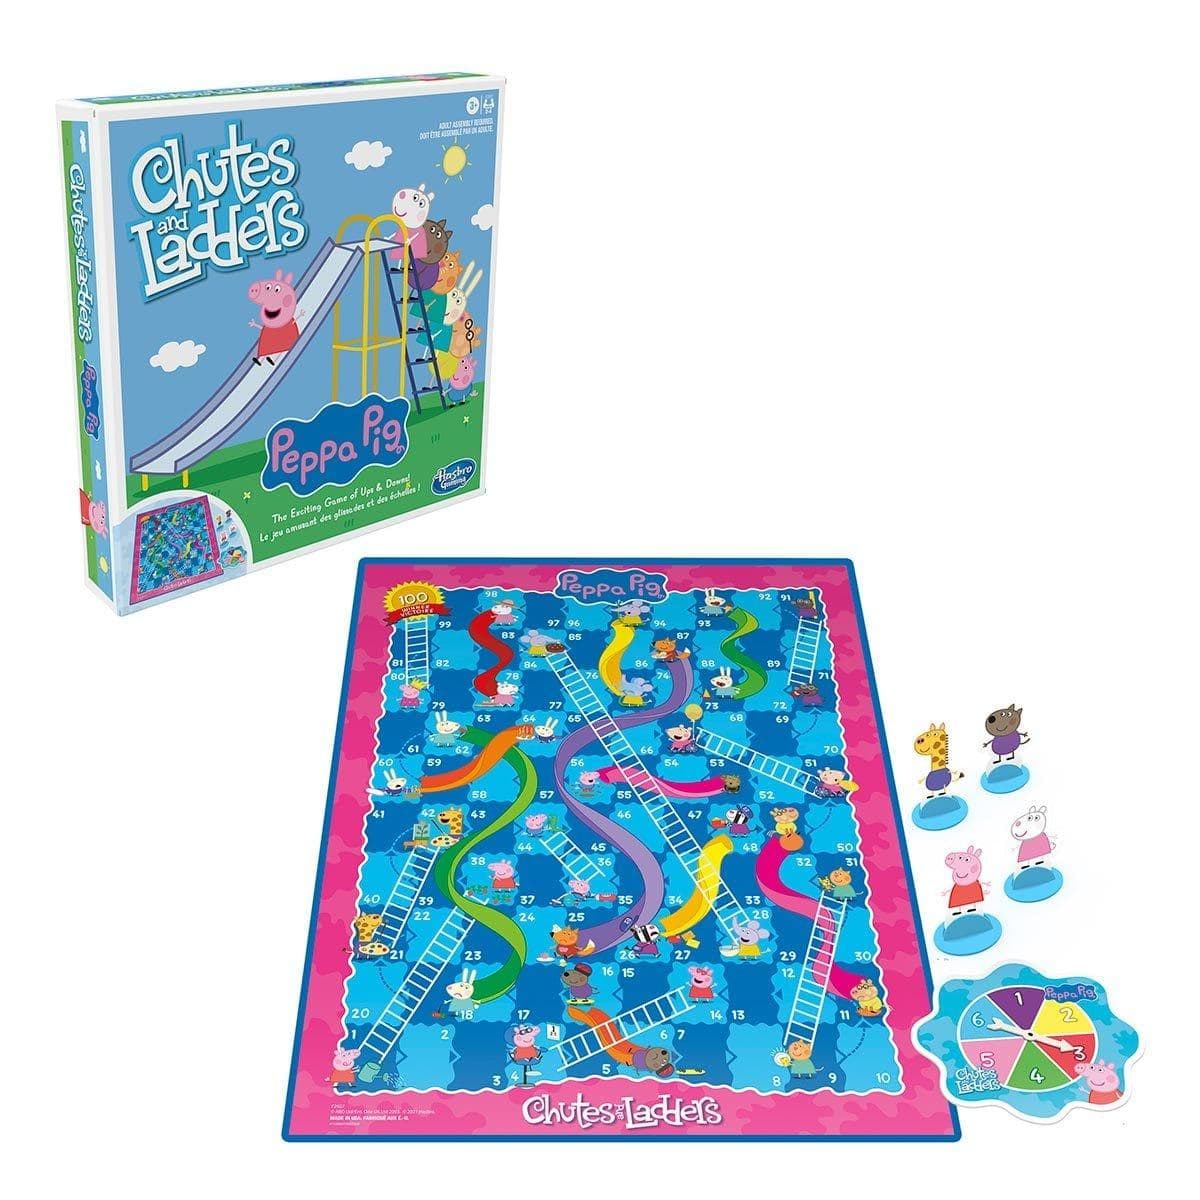 Buy Games Peppa Pig Chutes & Ladders Game sold at Party Expert